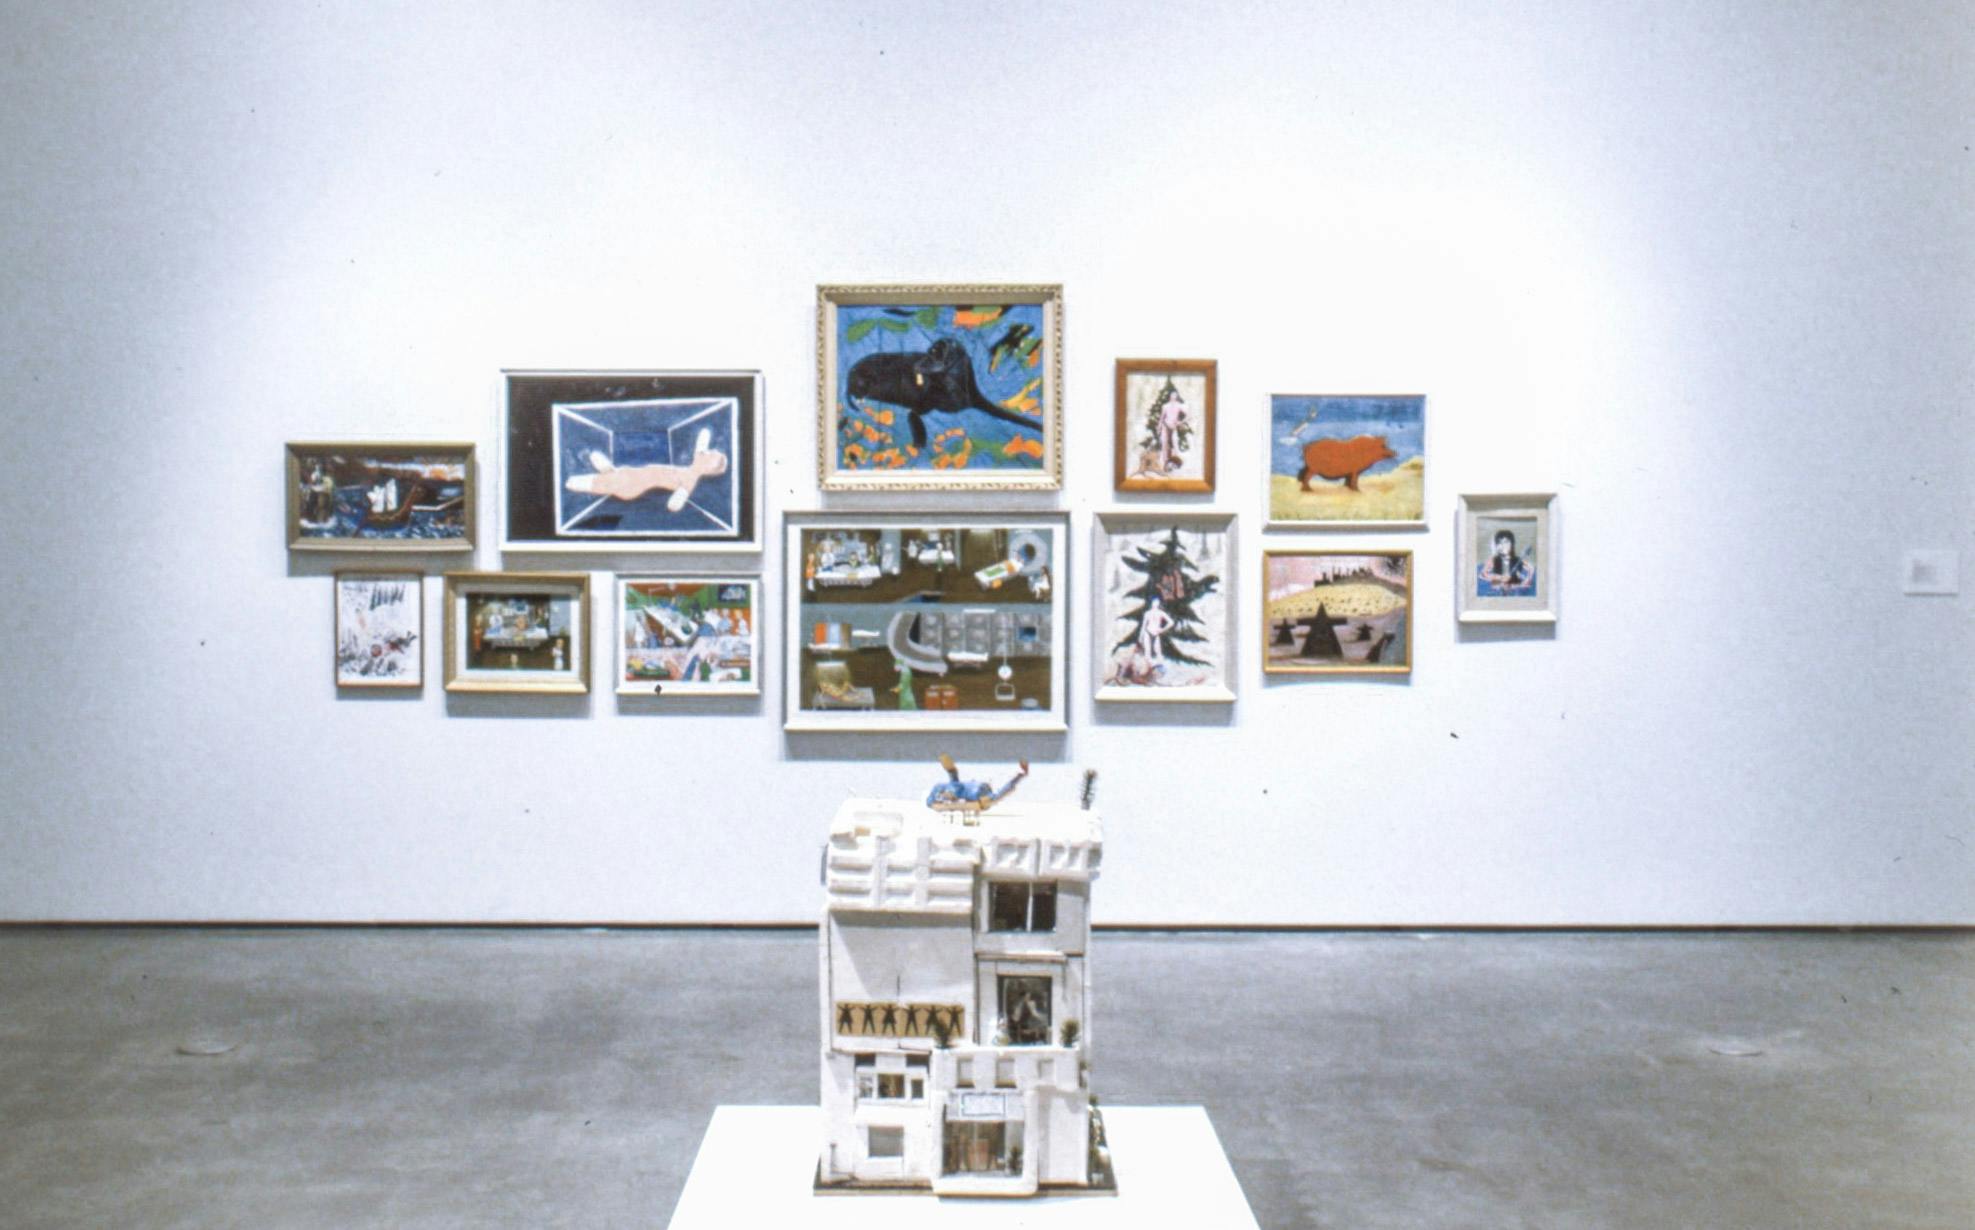 Twelve framed paintings are mounted on the gallery wall behind a sculpture. The sculpture depicts a white apartment building, on which a blue helicopter is landing.  